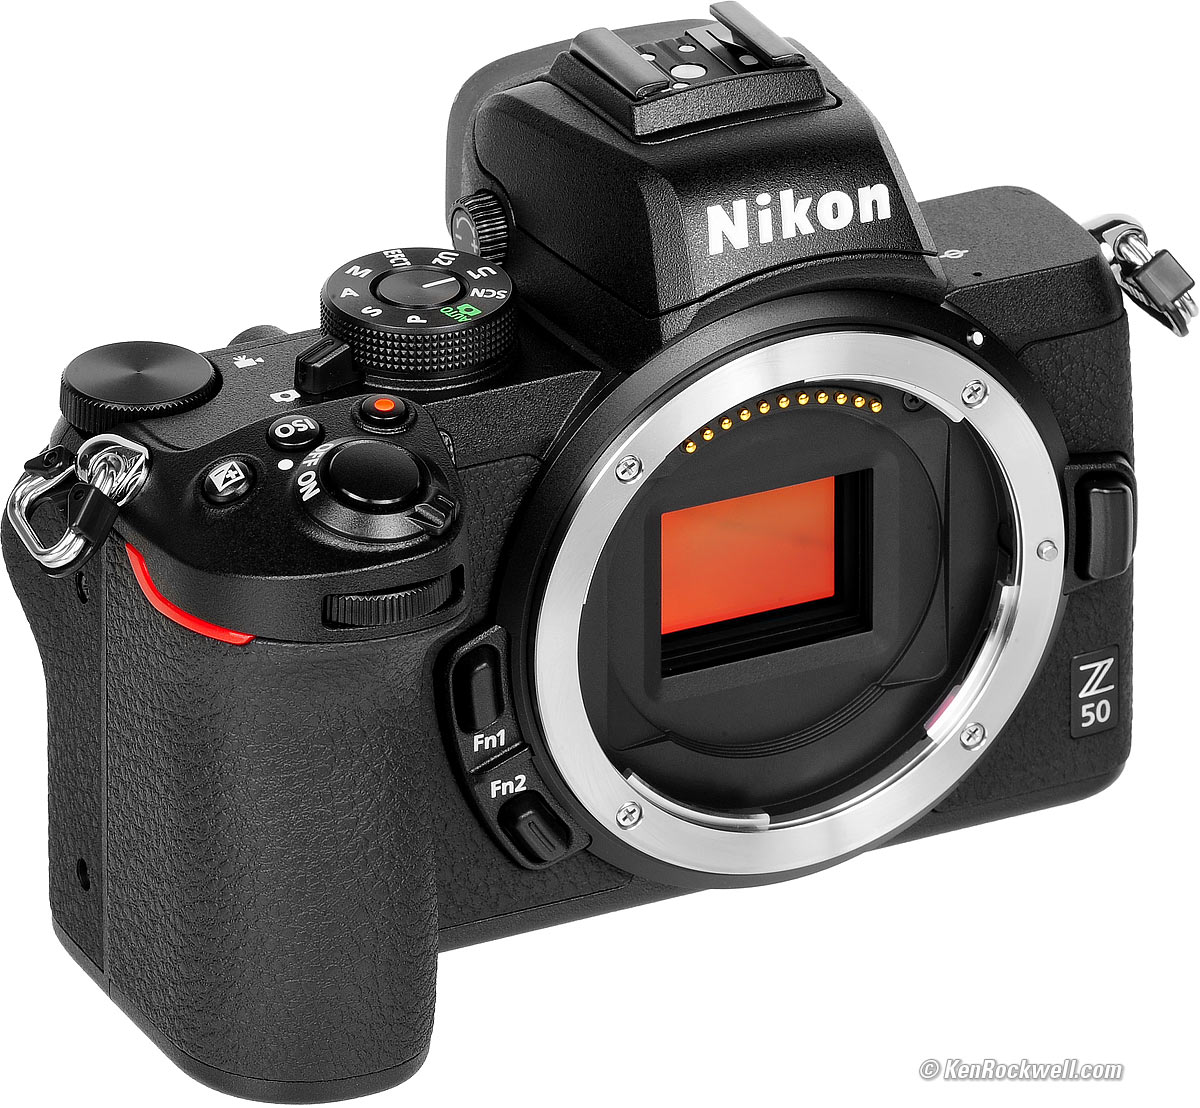 It's Nice, With Fantastic High ISO Images: Nikon z50 First Impressions